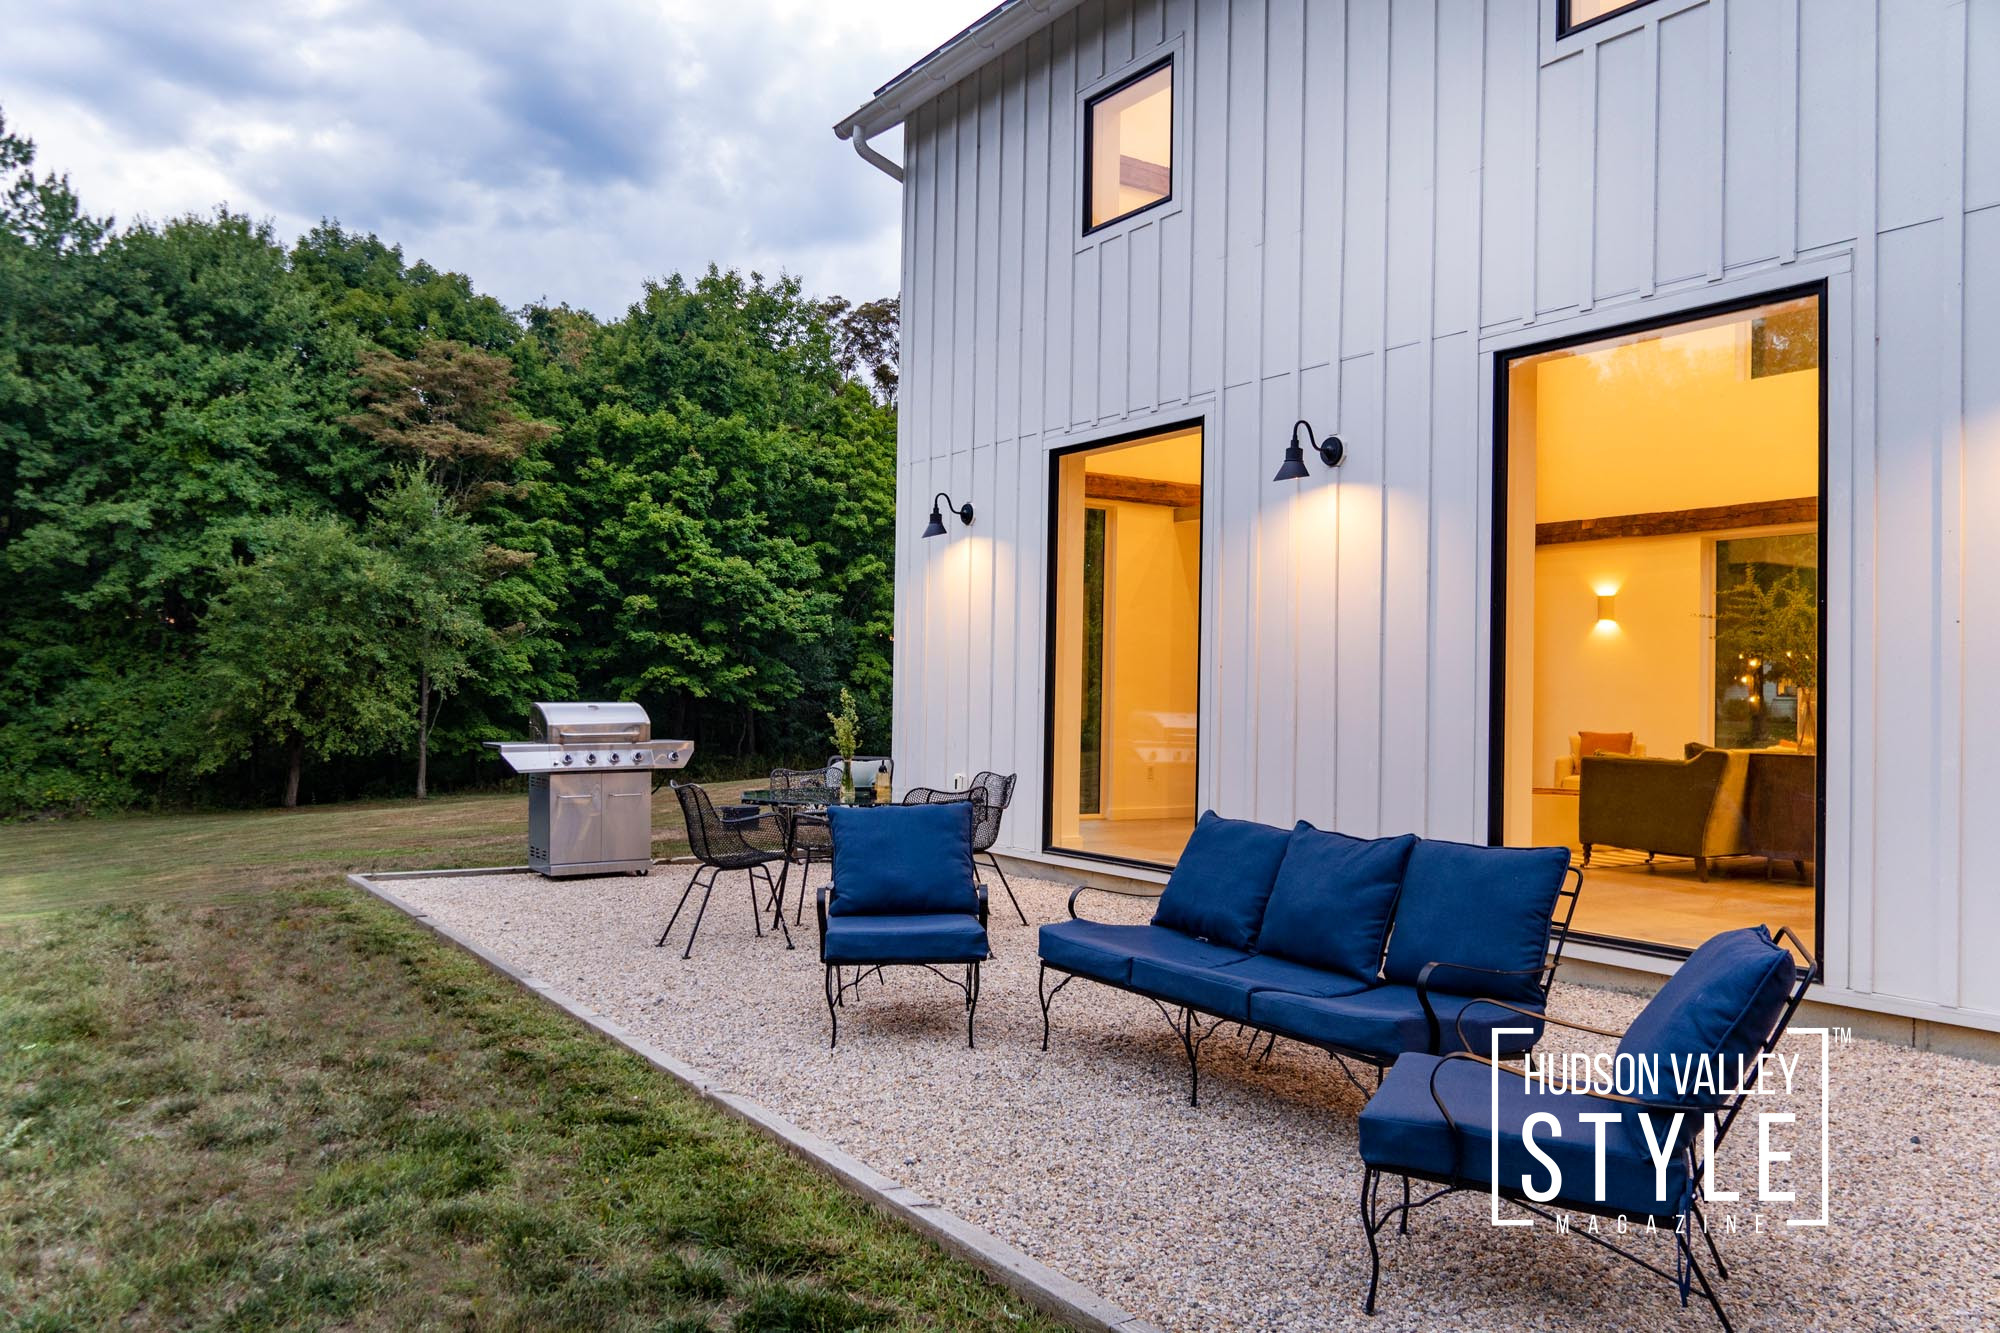 Airbnb Review of a Converted Barn Overlooking Apsley Hill Farm – Hudson Valley Airbnb Reviews with Photographer Maxwell Alexander – Best Airbnb Photography in the Hudson Valley, Upstate, NYC and Hamptons